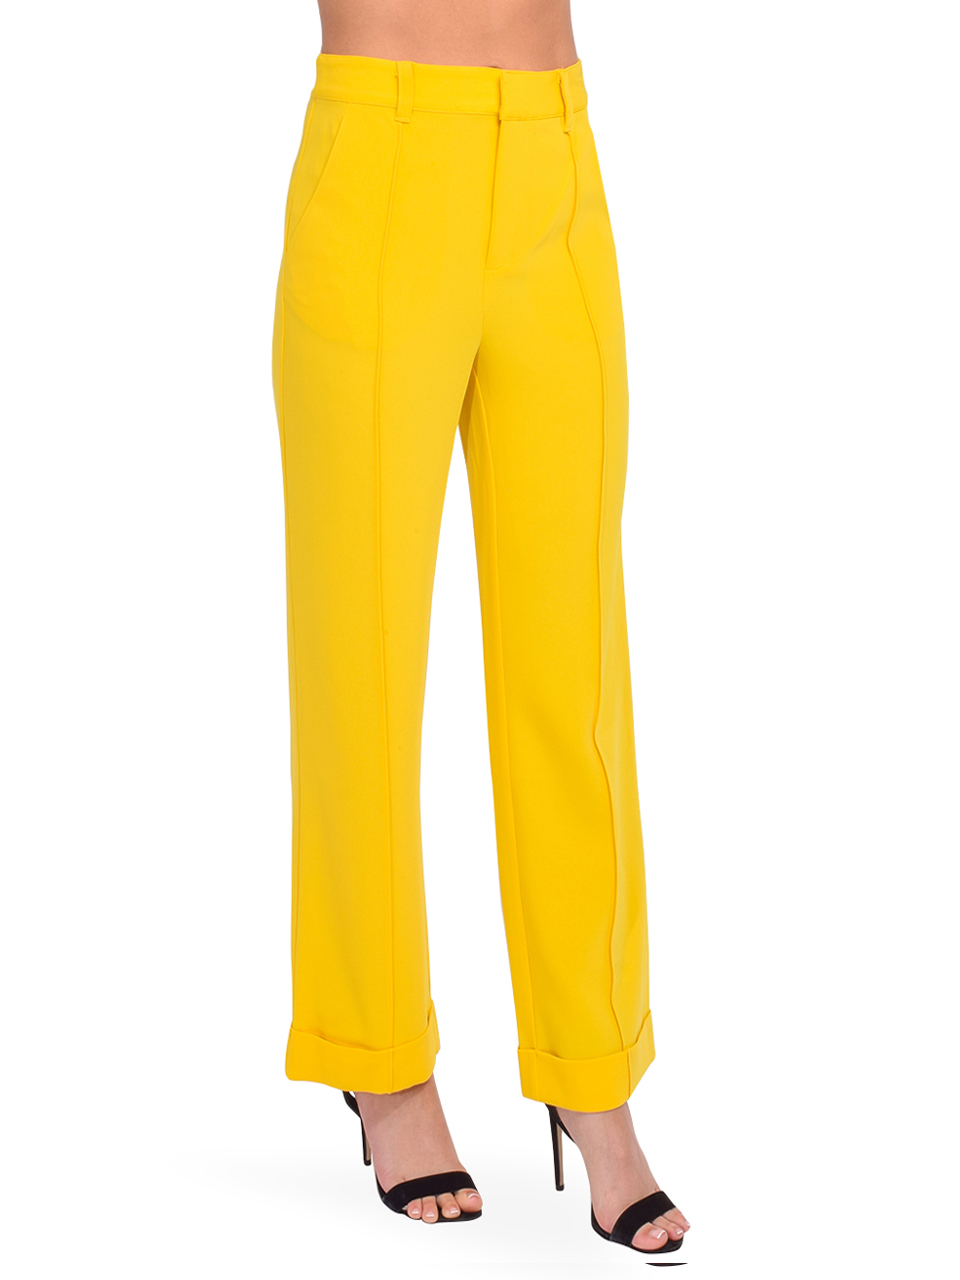 Cinq a Sept Kris High-Rise Wide-Leg Pant in Pineapple Side View 